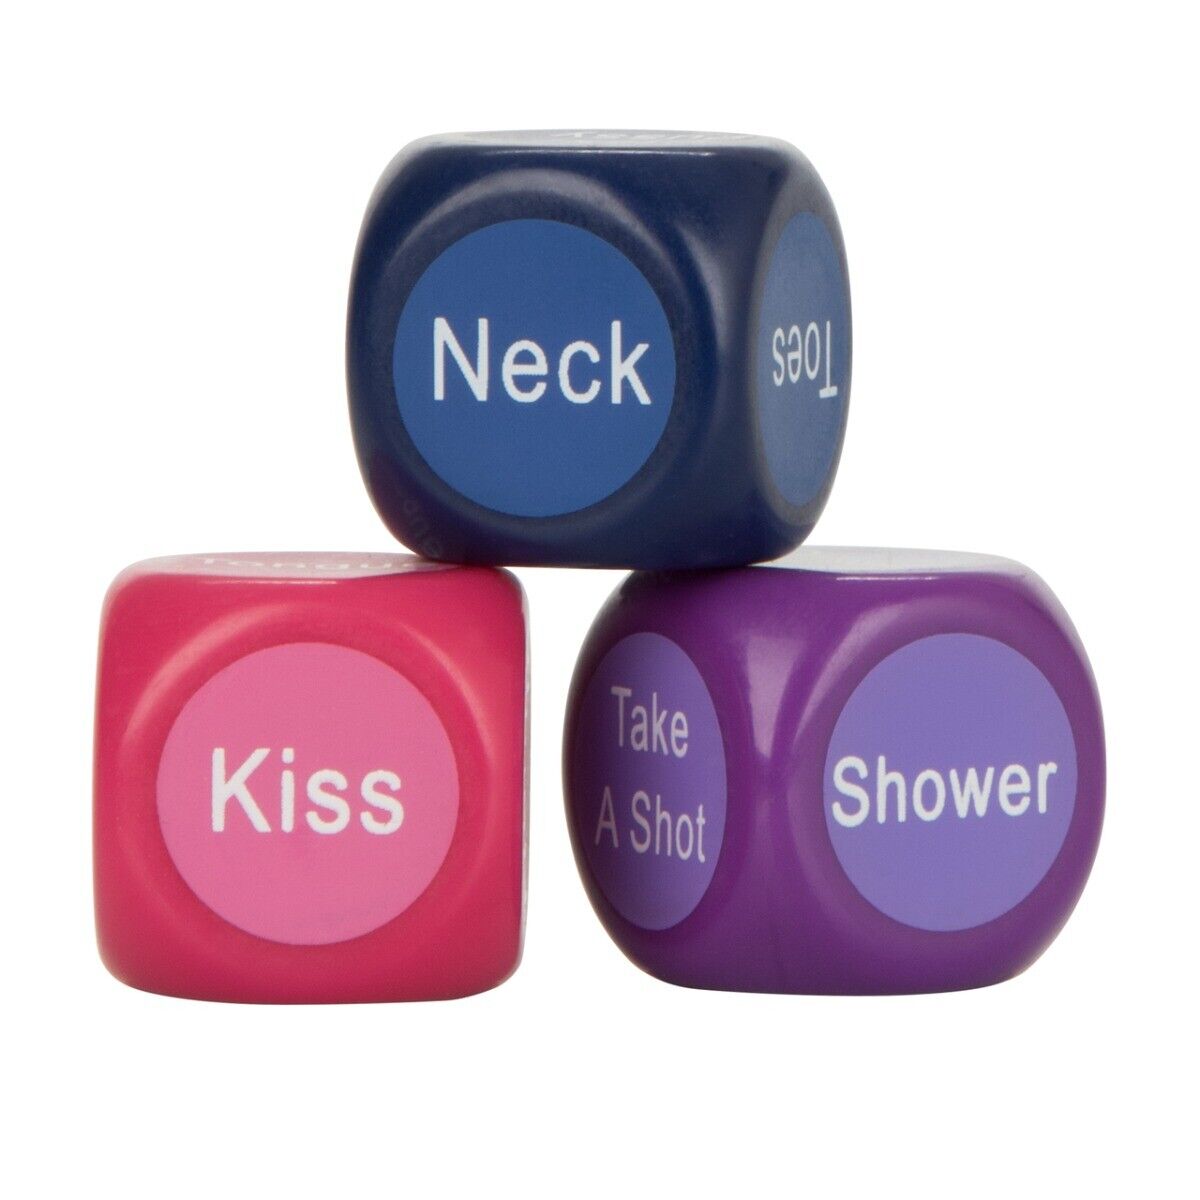 Shane's Sex Dice 101 Adult Sex Toy Games Couple Lover Romantic Gift Game